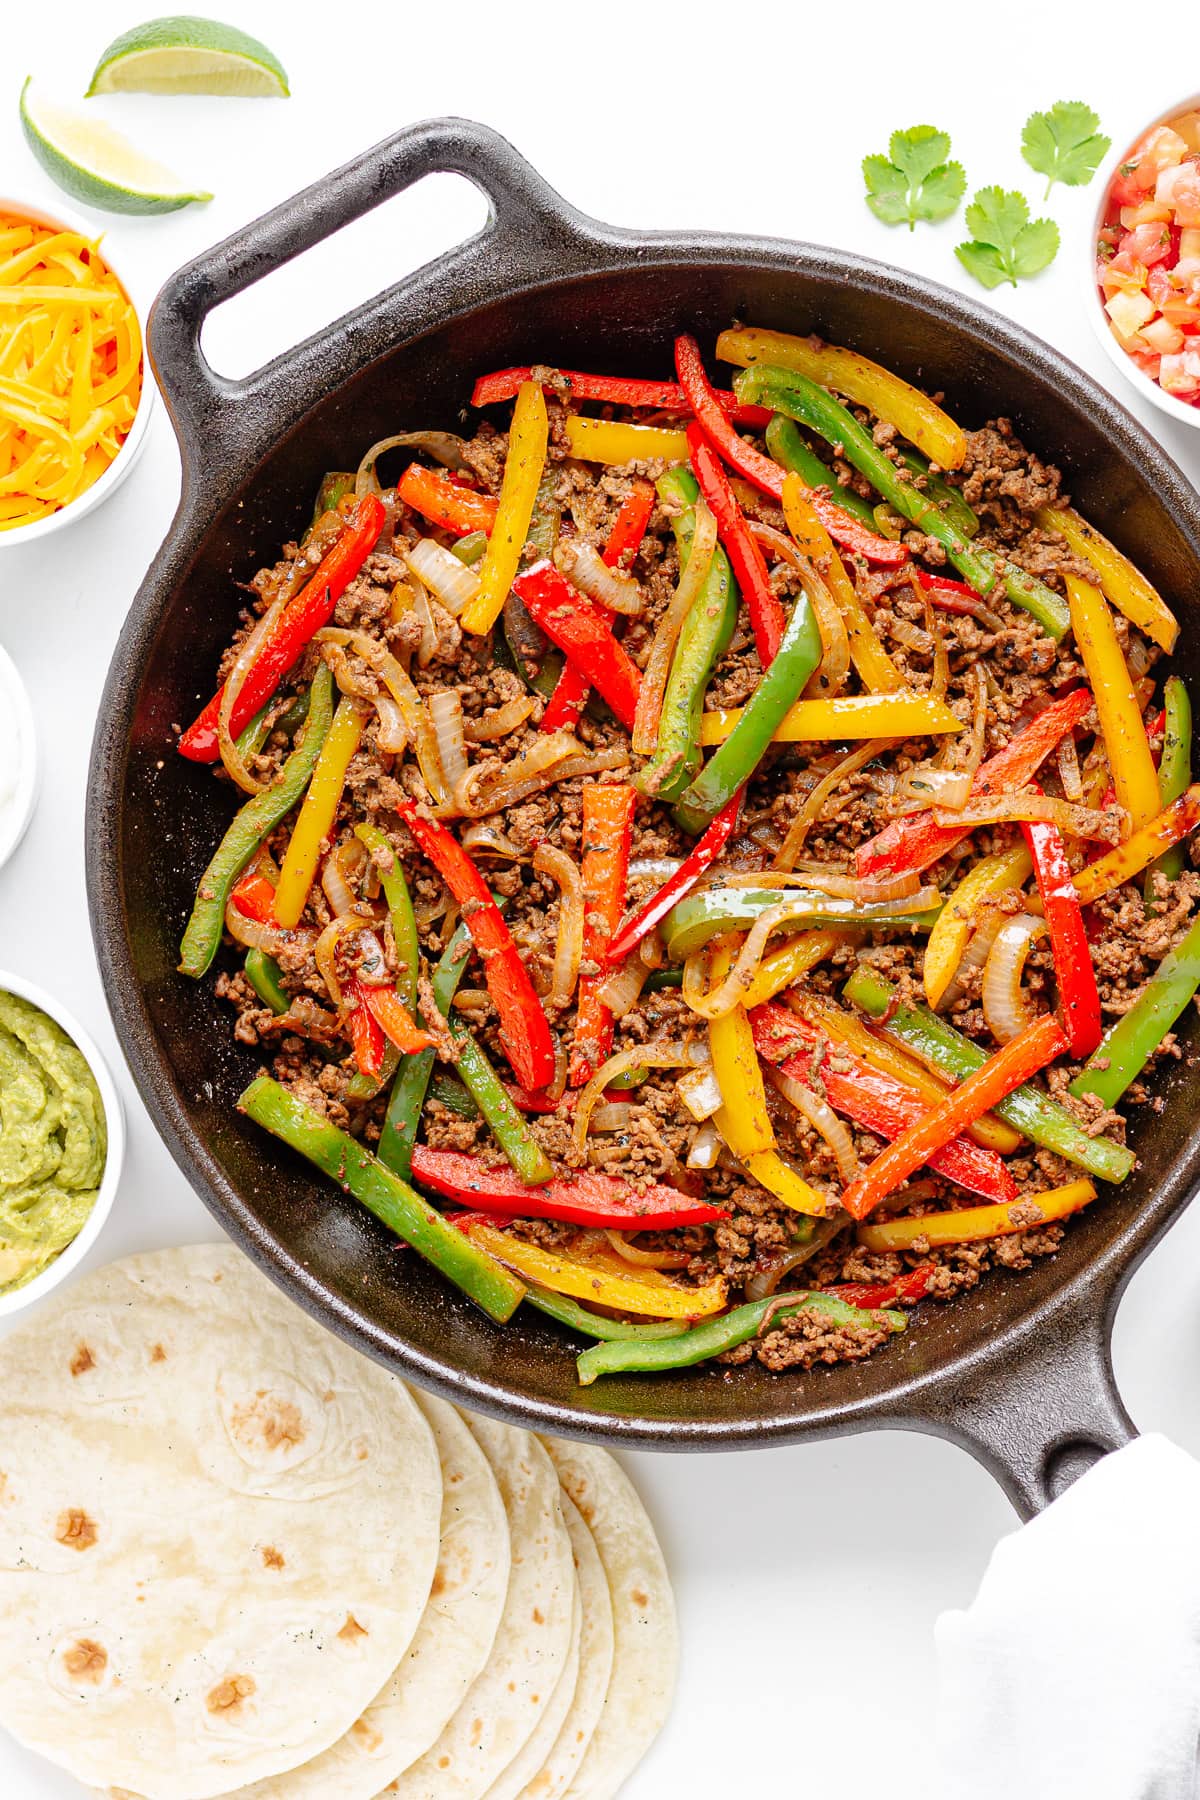 Cast iron skillet of ground beef fajitas mixture surrounded by tortillas and various toppings.